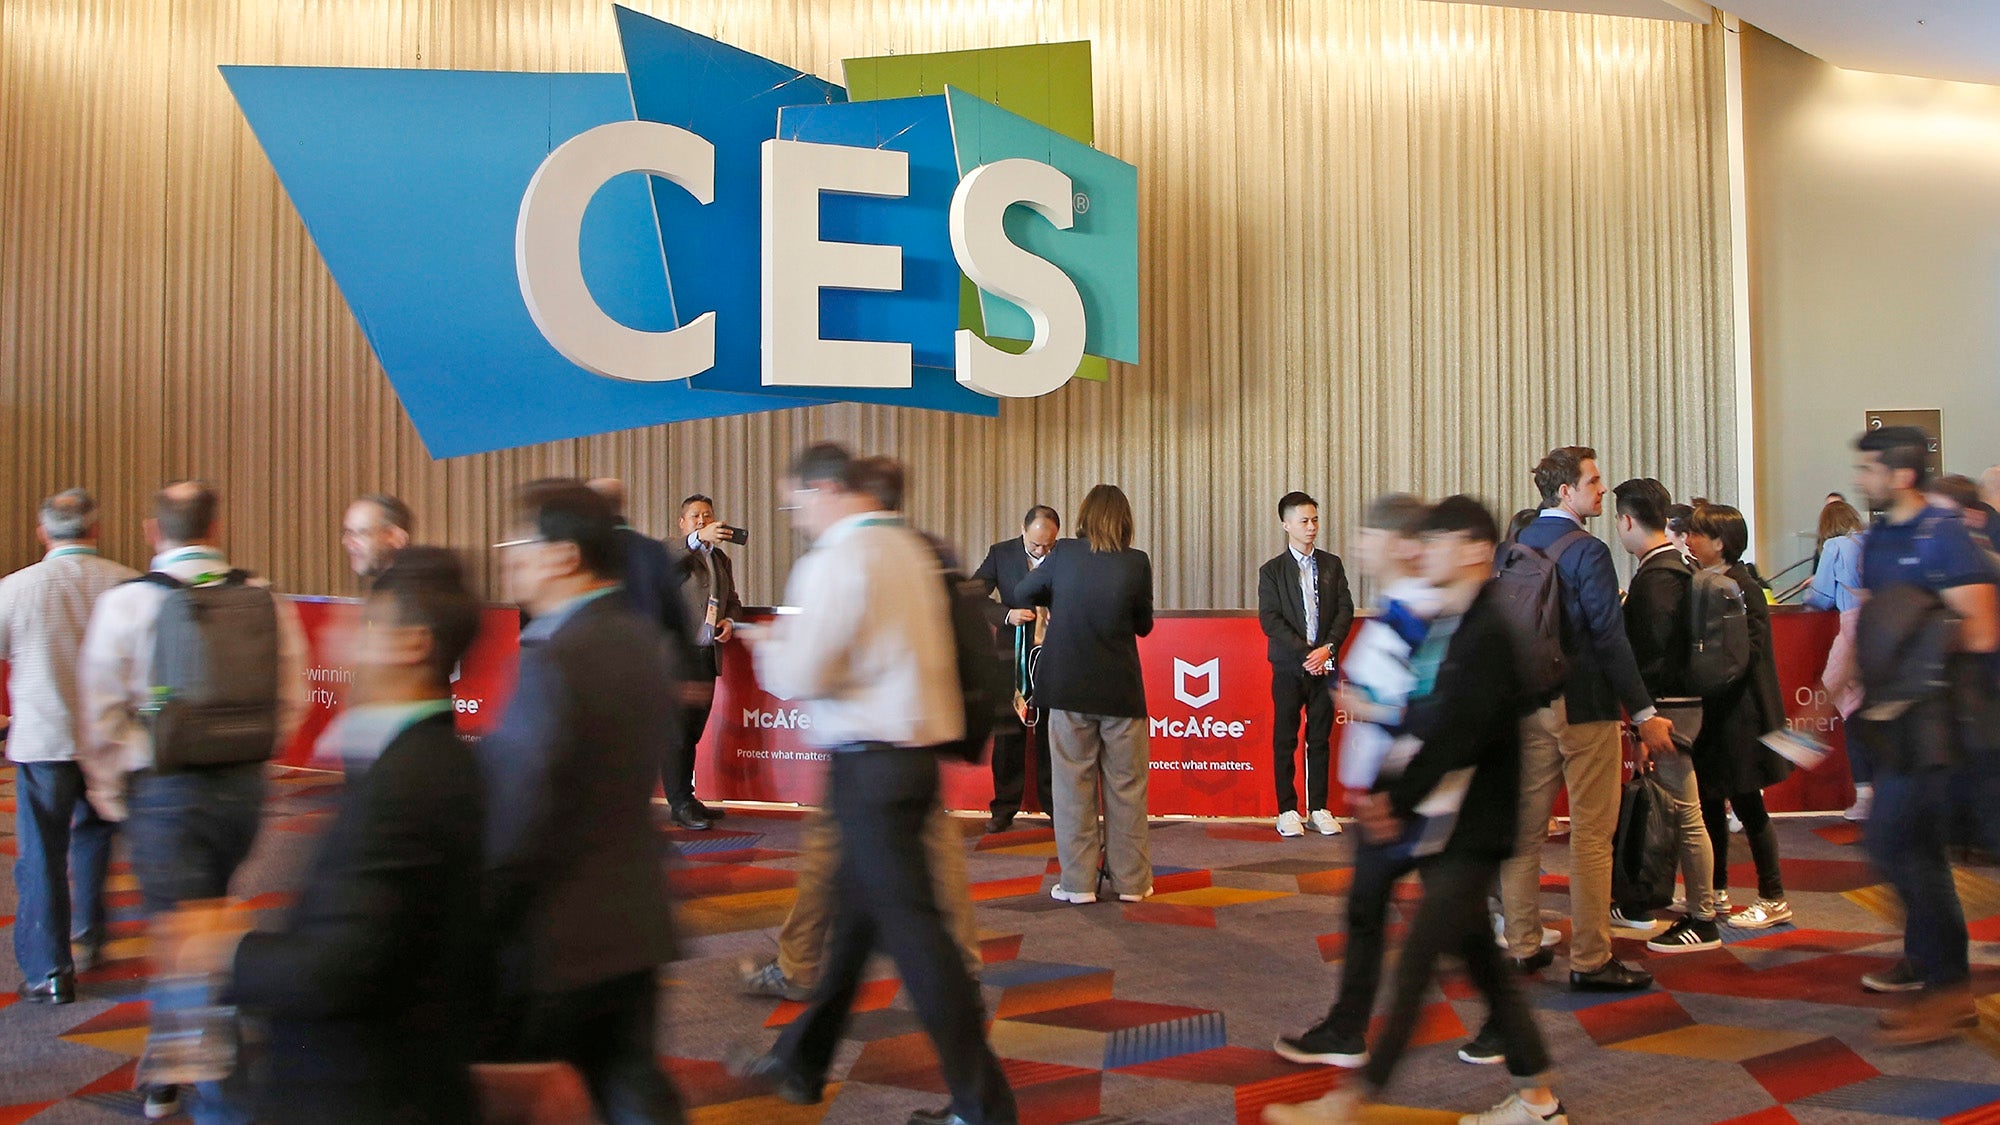 Sex Tech Industry Sees Rapid Growth As Ces Exposure Helps Normalize